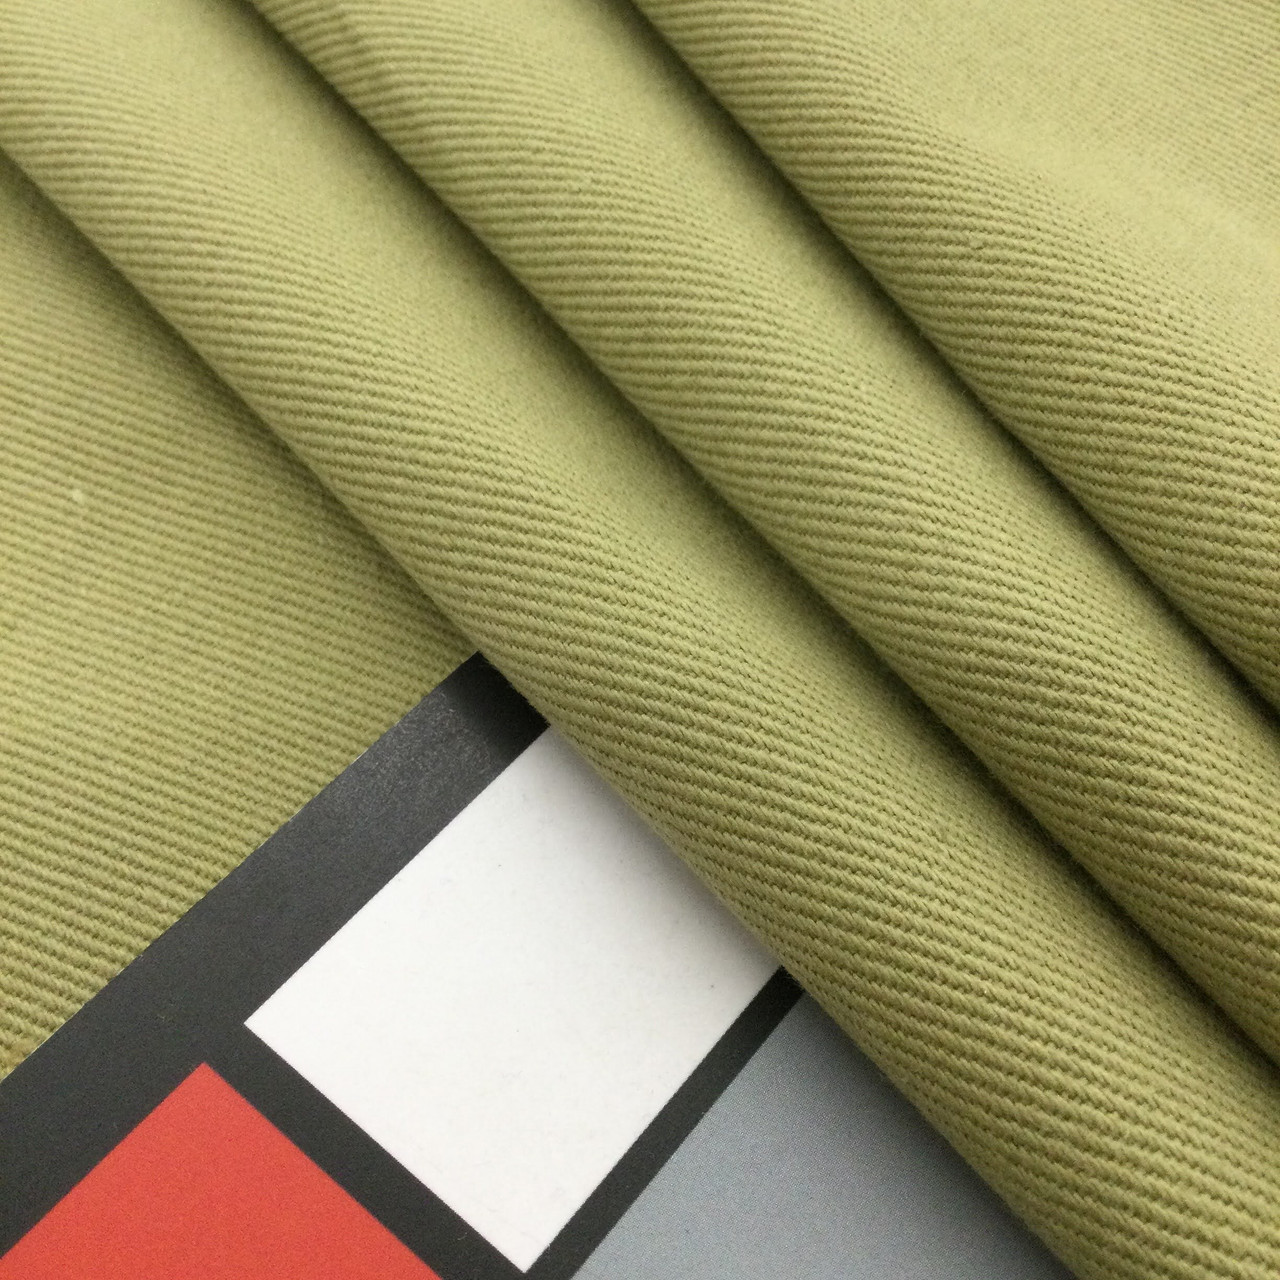 Solid Olive Green, Cotton Twill Fabric, 8 oz., Apparel / Slipcovers /  Bedding, 54 Wide